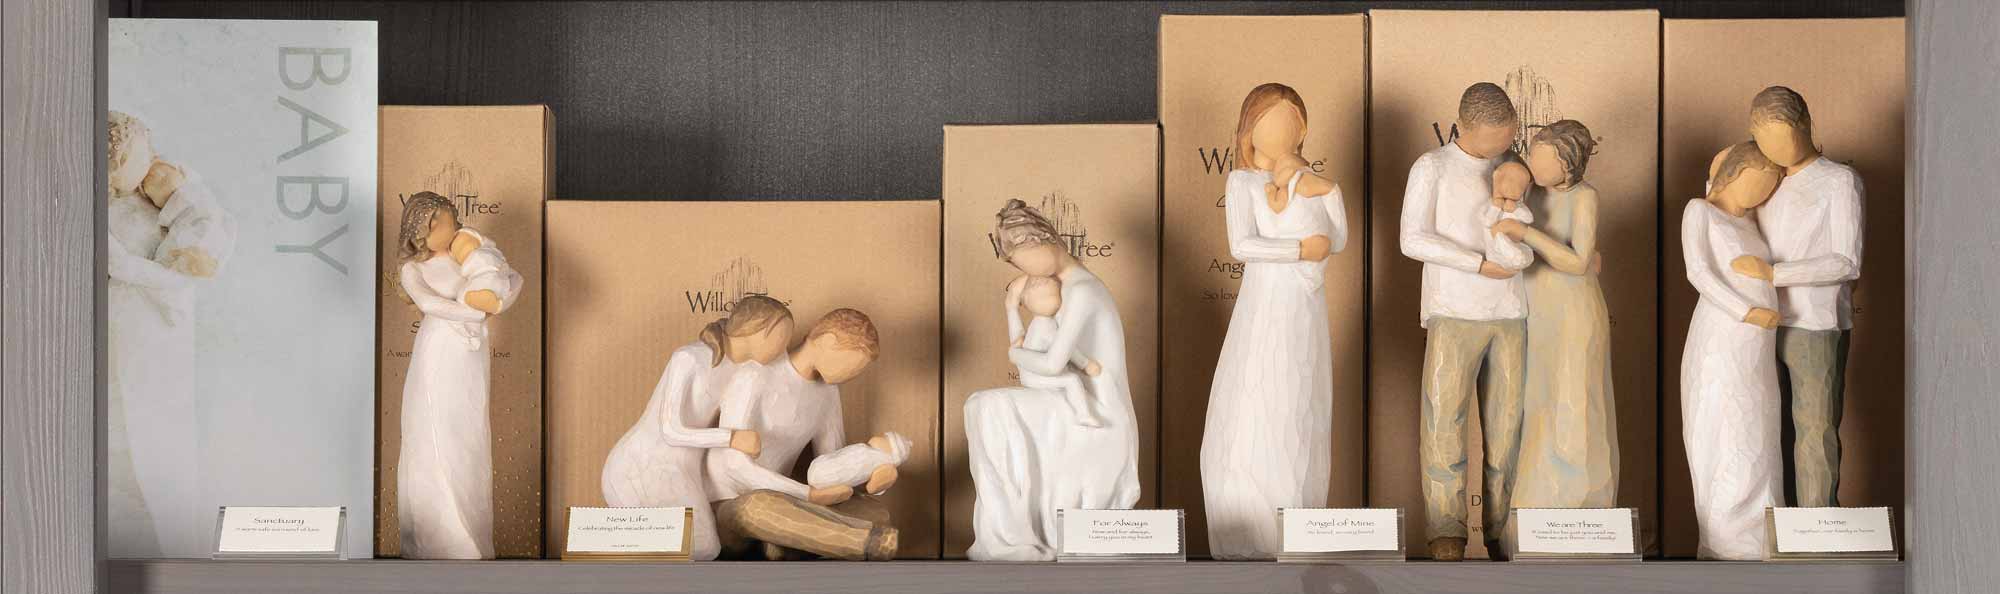 Willow Tree hand carved figures displayed on a store shelf with a sign that says BABY